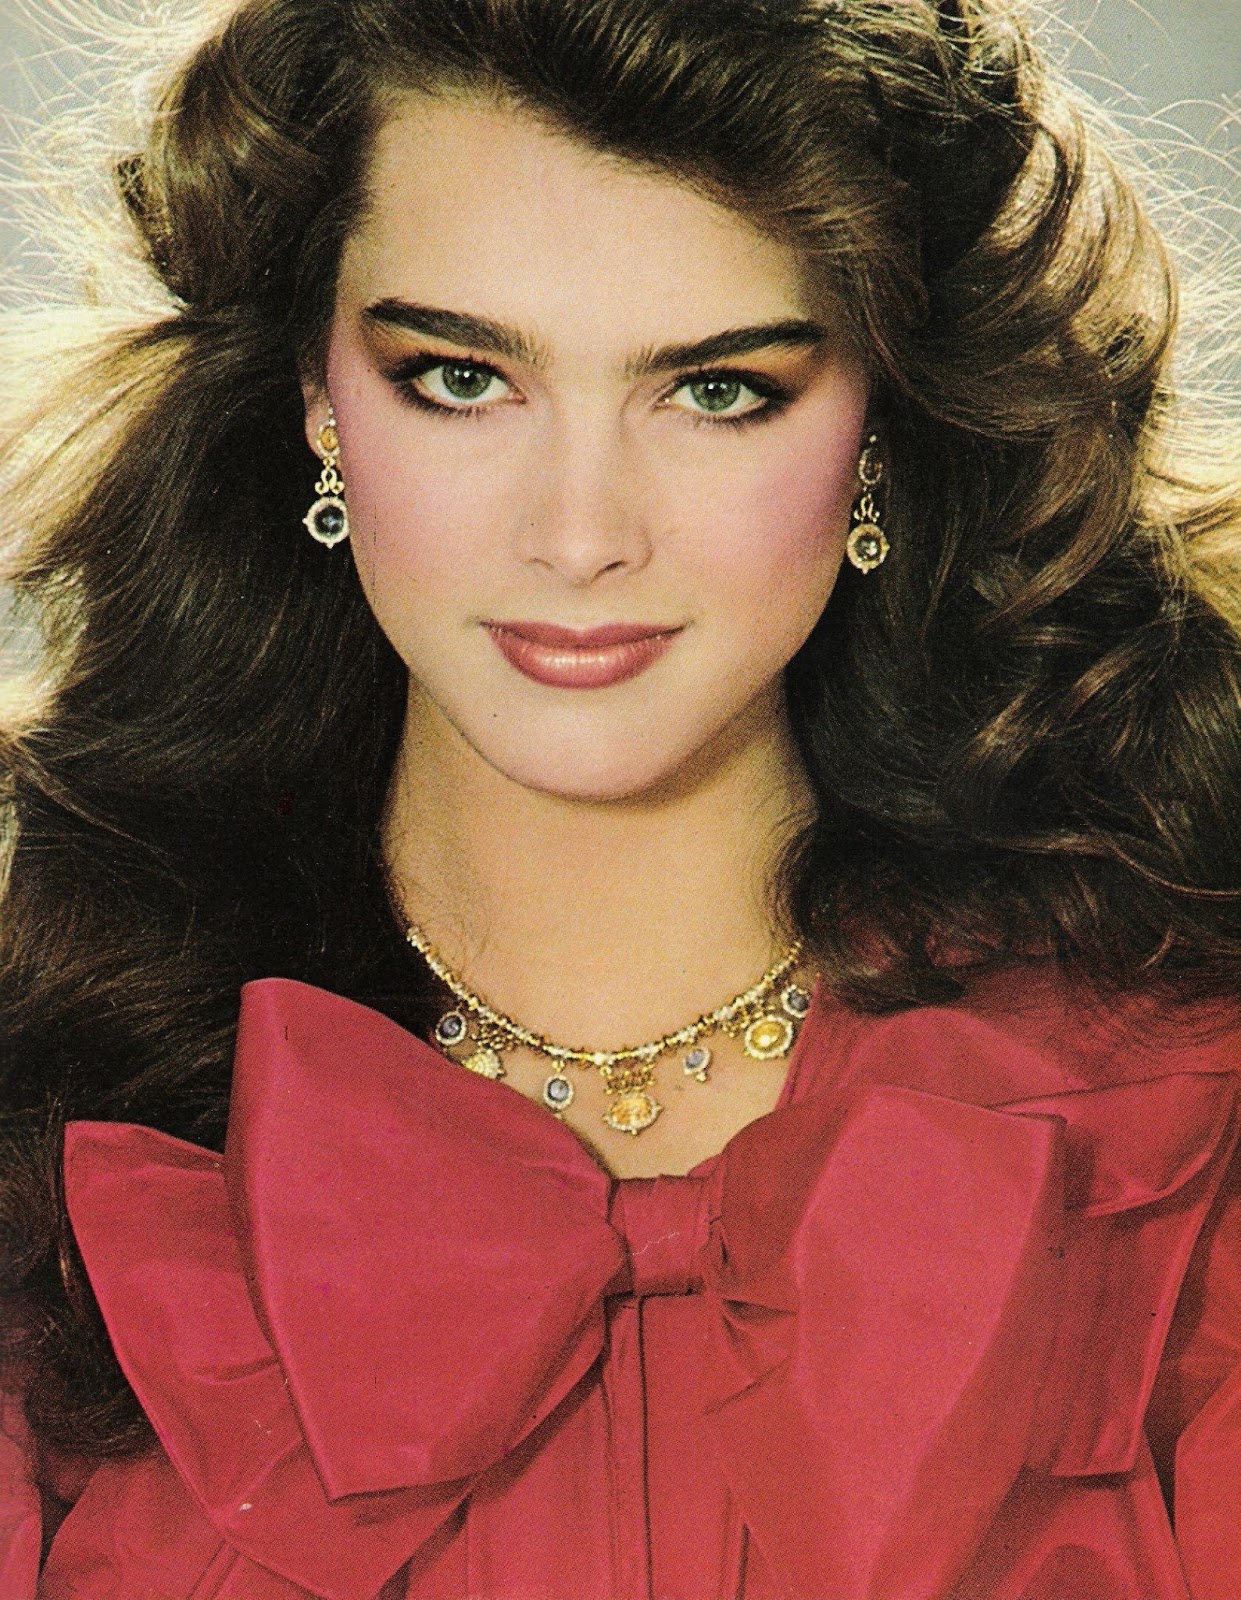 one of a series of photographs that brooke shields posed for at the age of ...